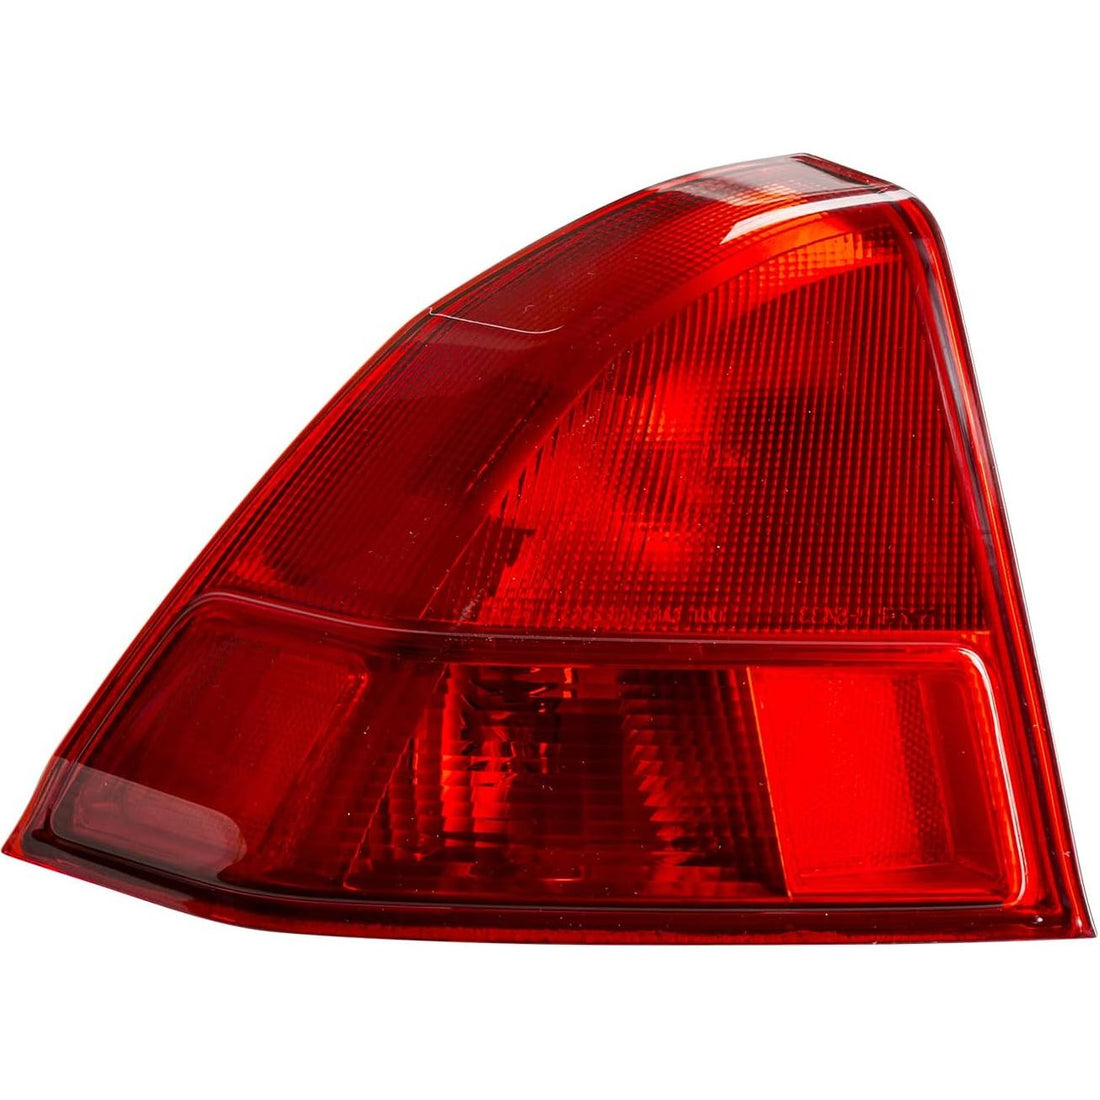 TYC 11-5434-00 Honda Civic Driver Side Replacement Tail Light Assembly